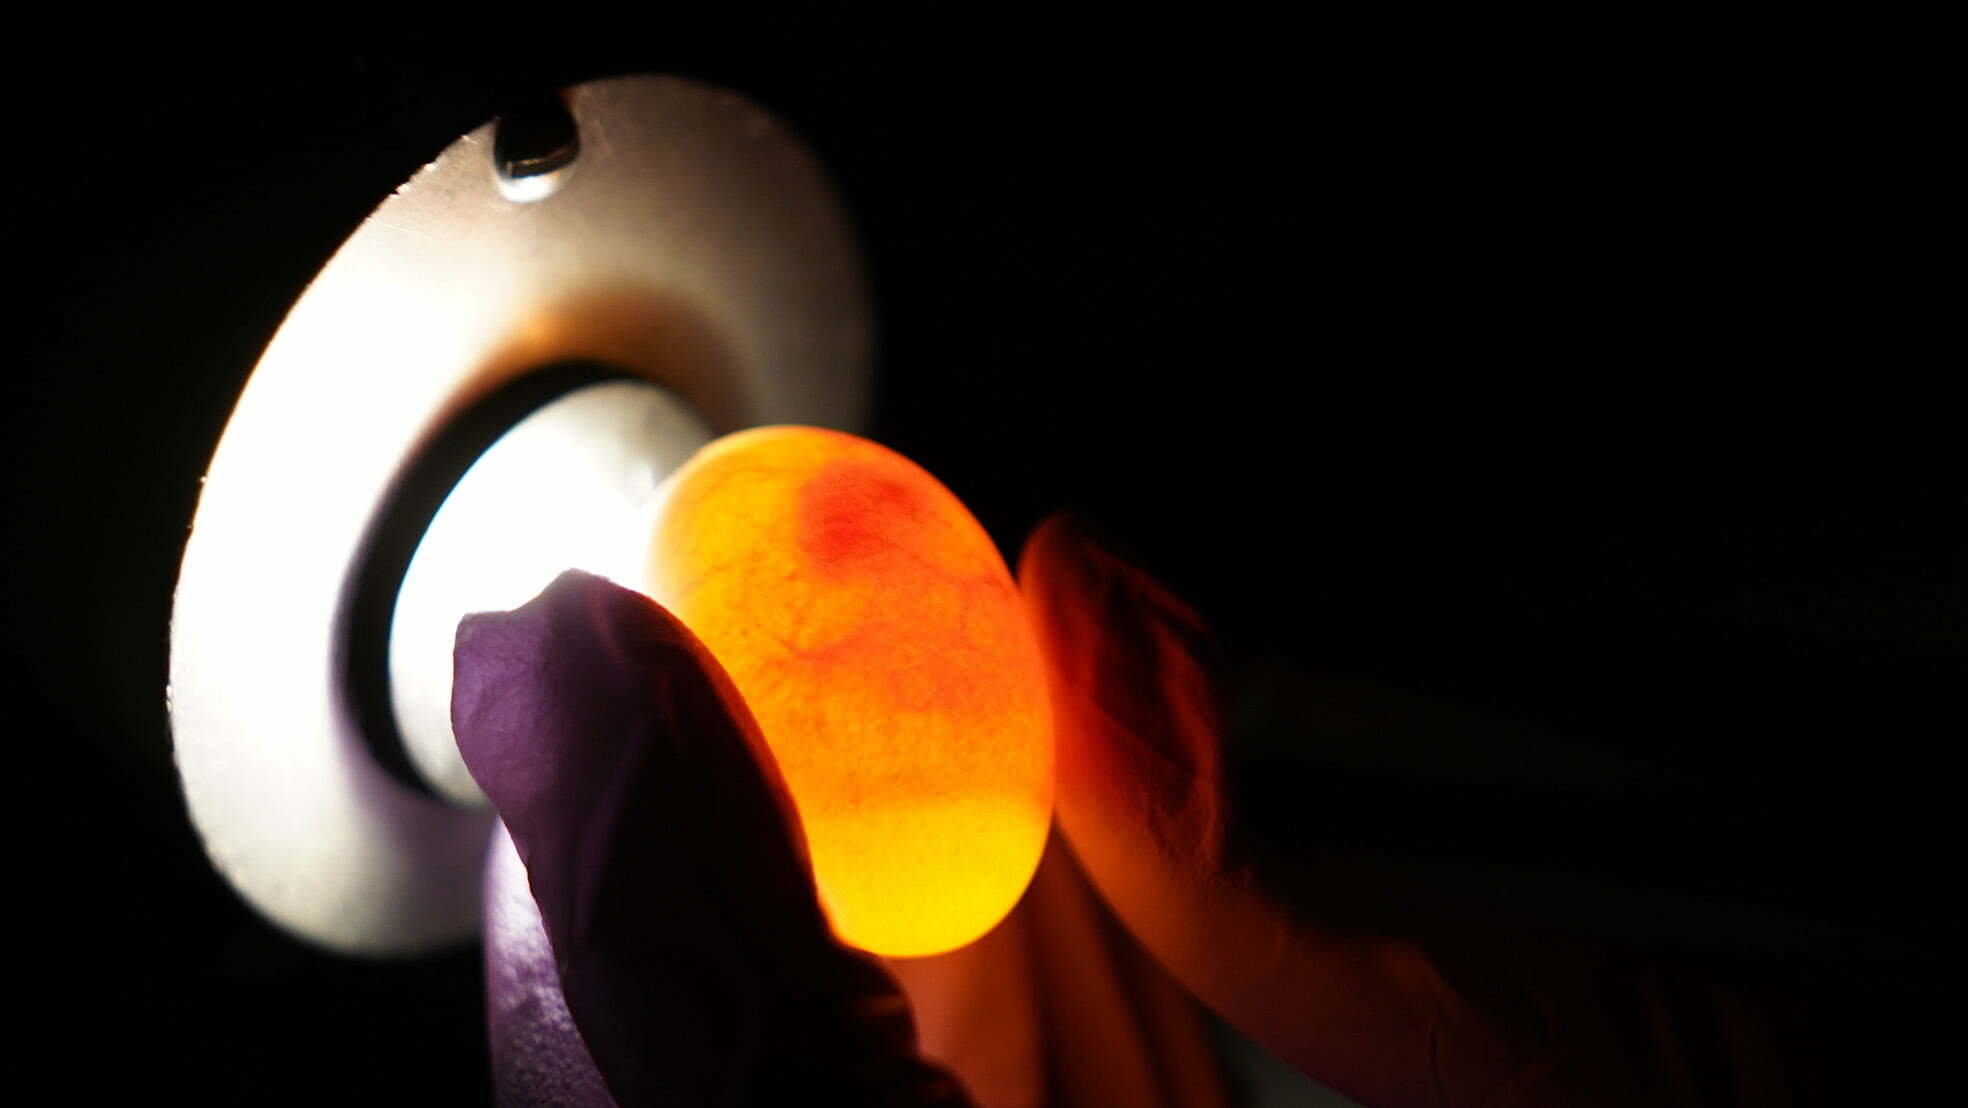 A Crested Coua egg being candled at the Avian Research Center at Disney's Animal Kingdom.